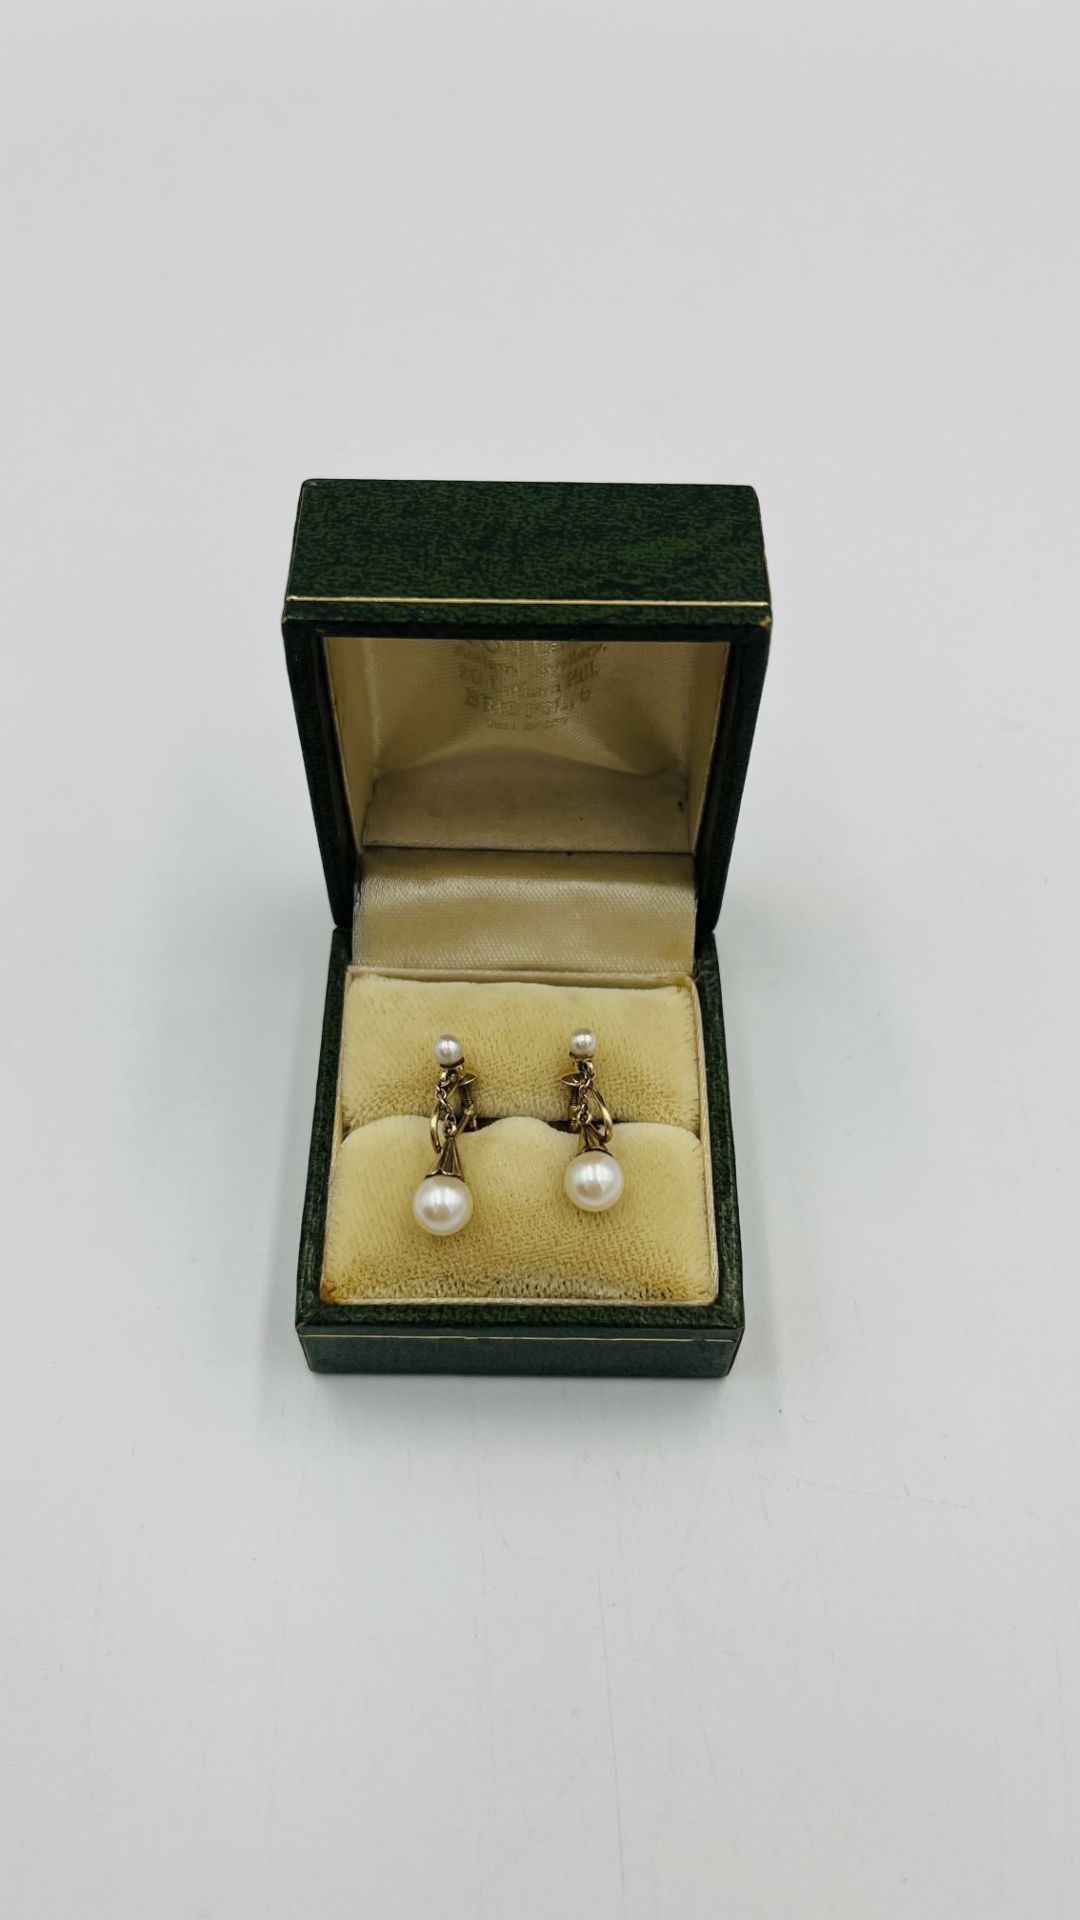 Pair of 9ct gold earrings with pearl drops - Image 3 of 3